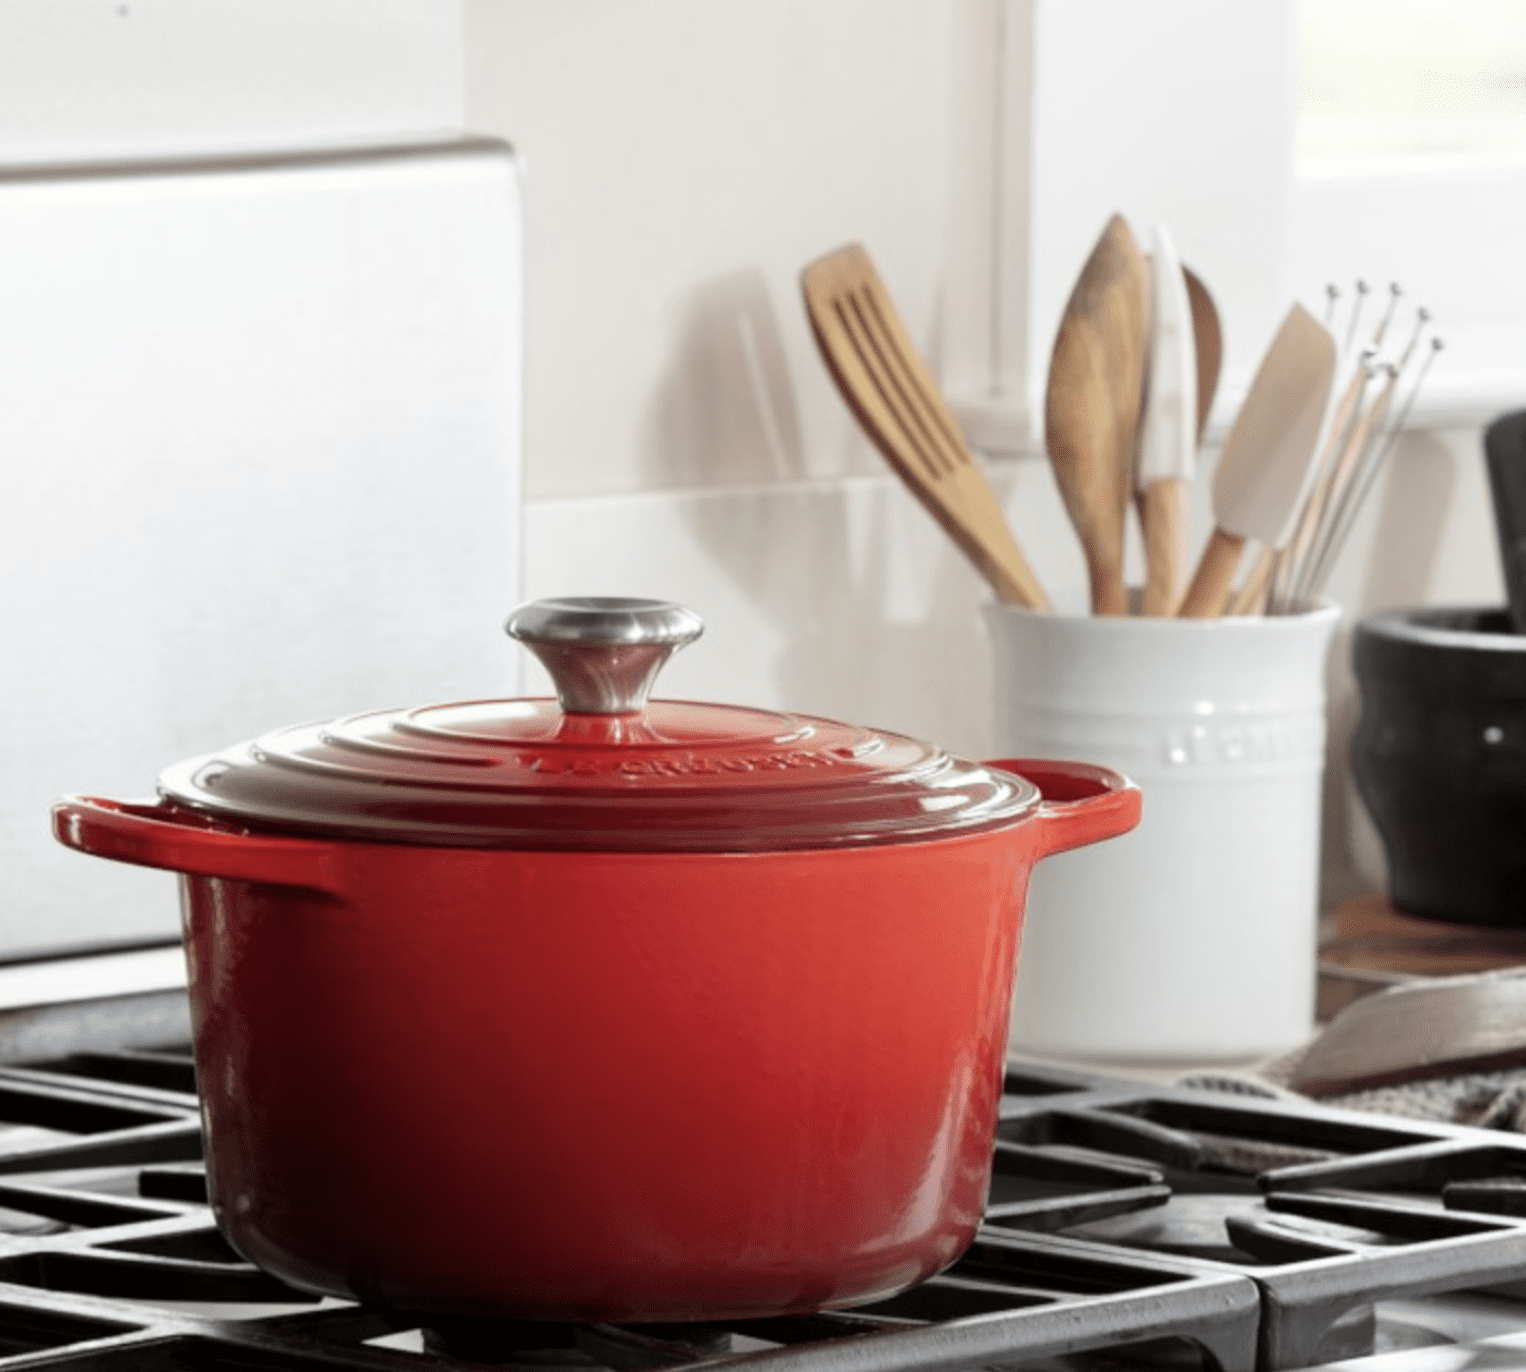 Le Creuset launches new fall color Nutmeg and Labor Day discounts - Good  Morning America